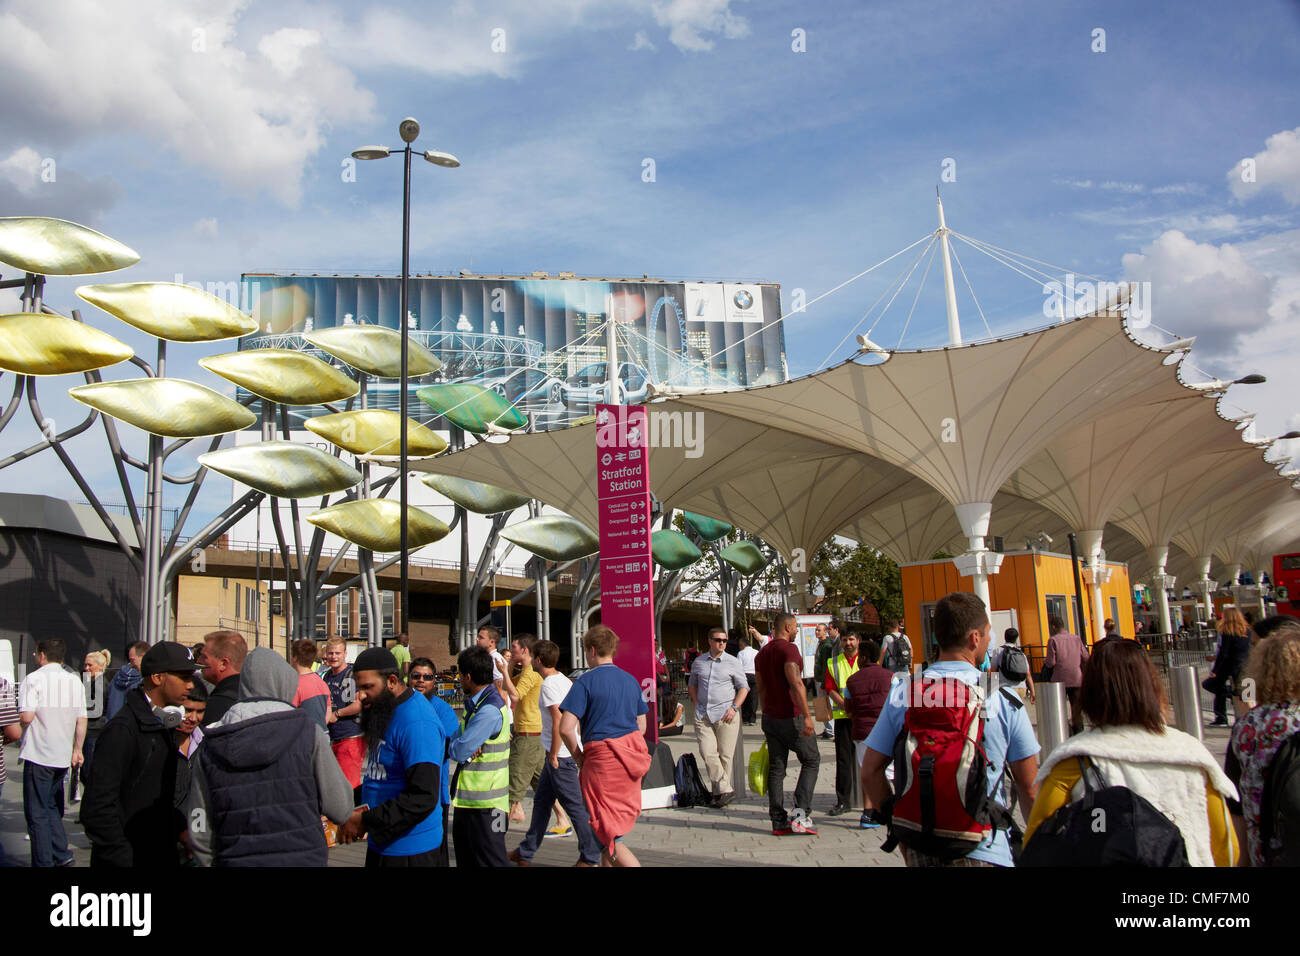 People leaving Olympic Park at Stratford Railway Station London E20 UK, Stock Photo